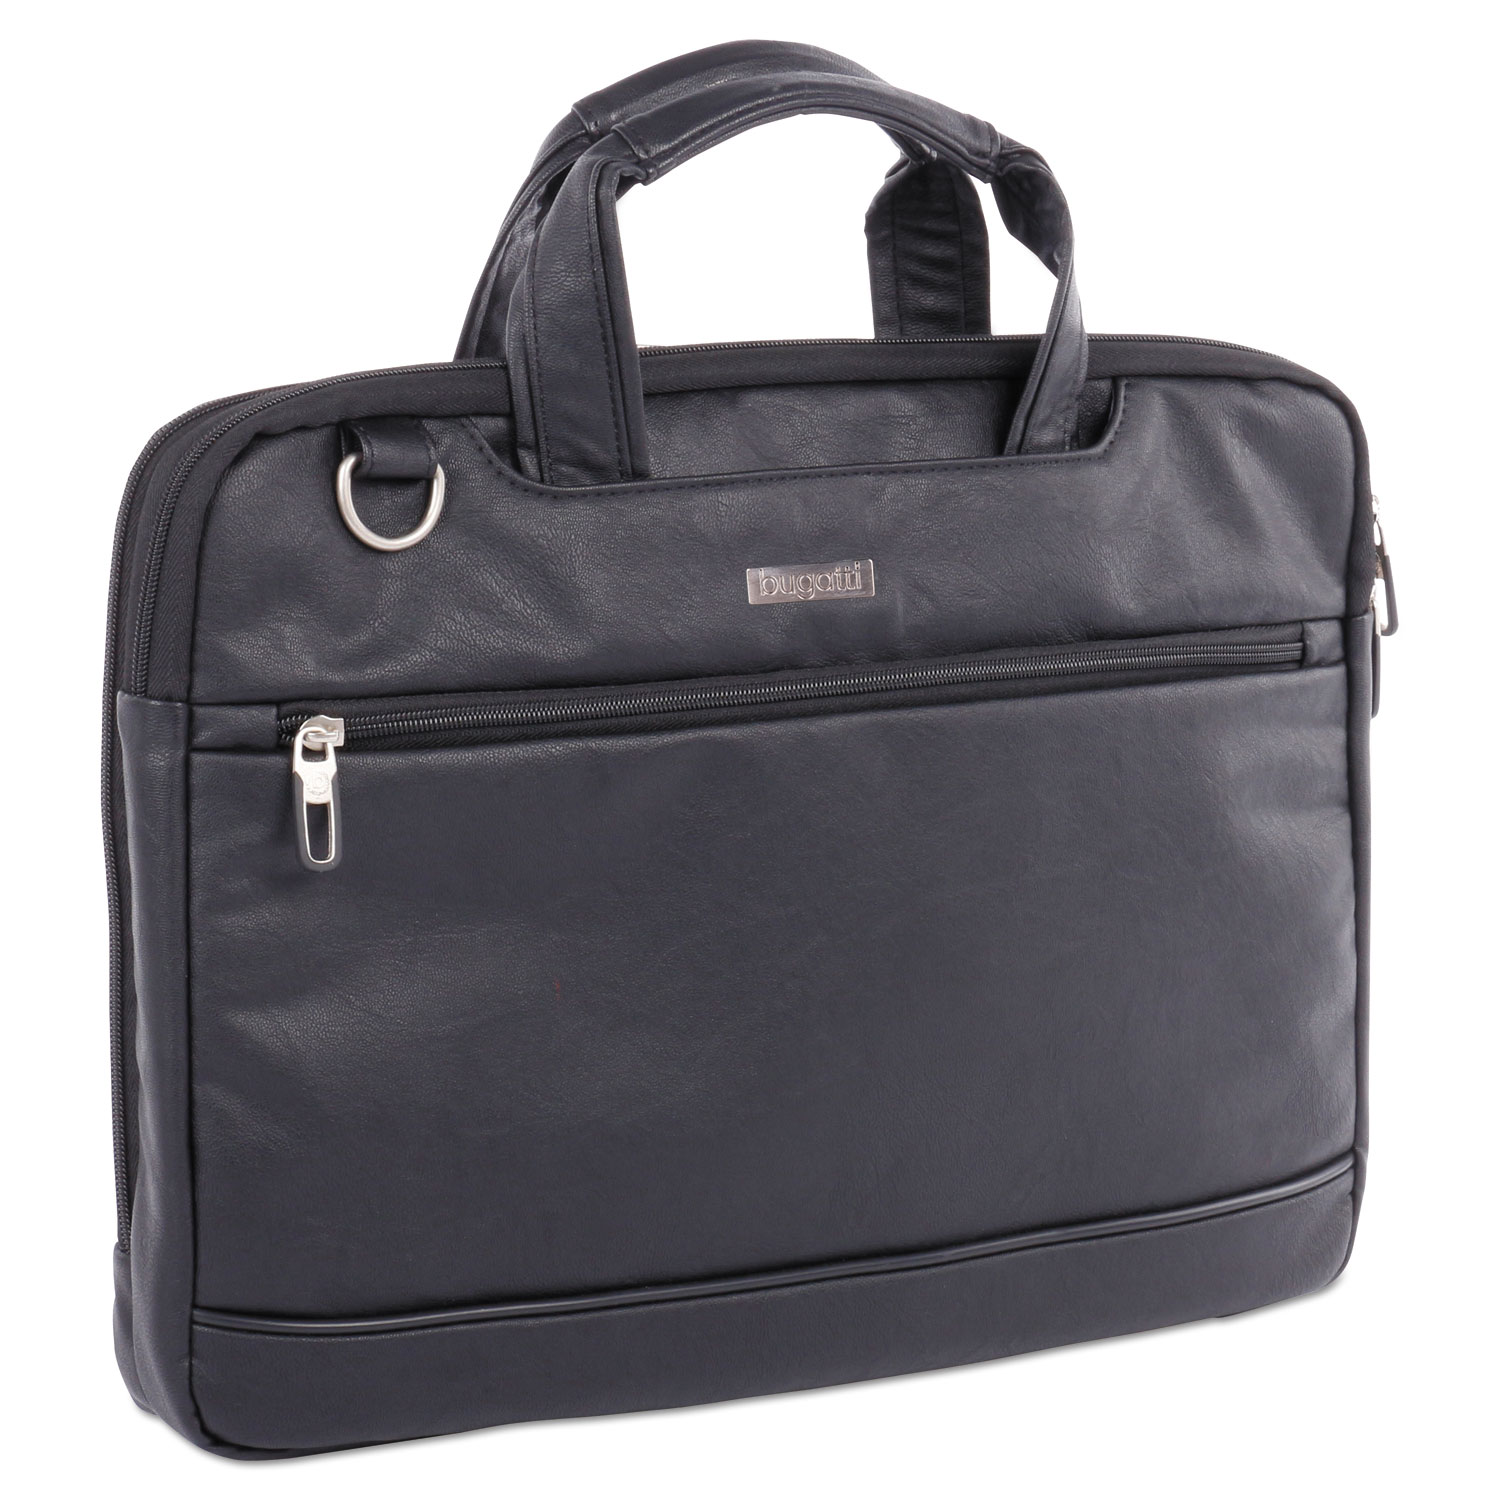 Harold Slim Briefcase, 11 x 3 x 11.5, Synthetic Leather, Black